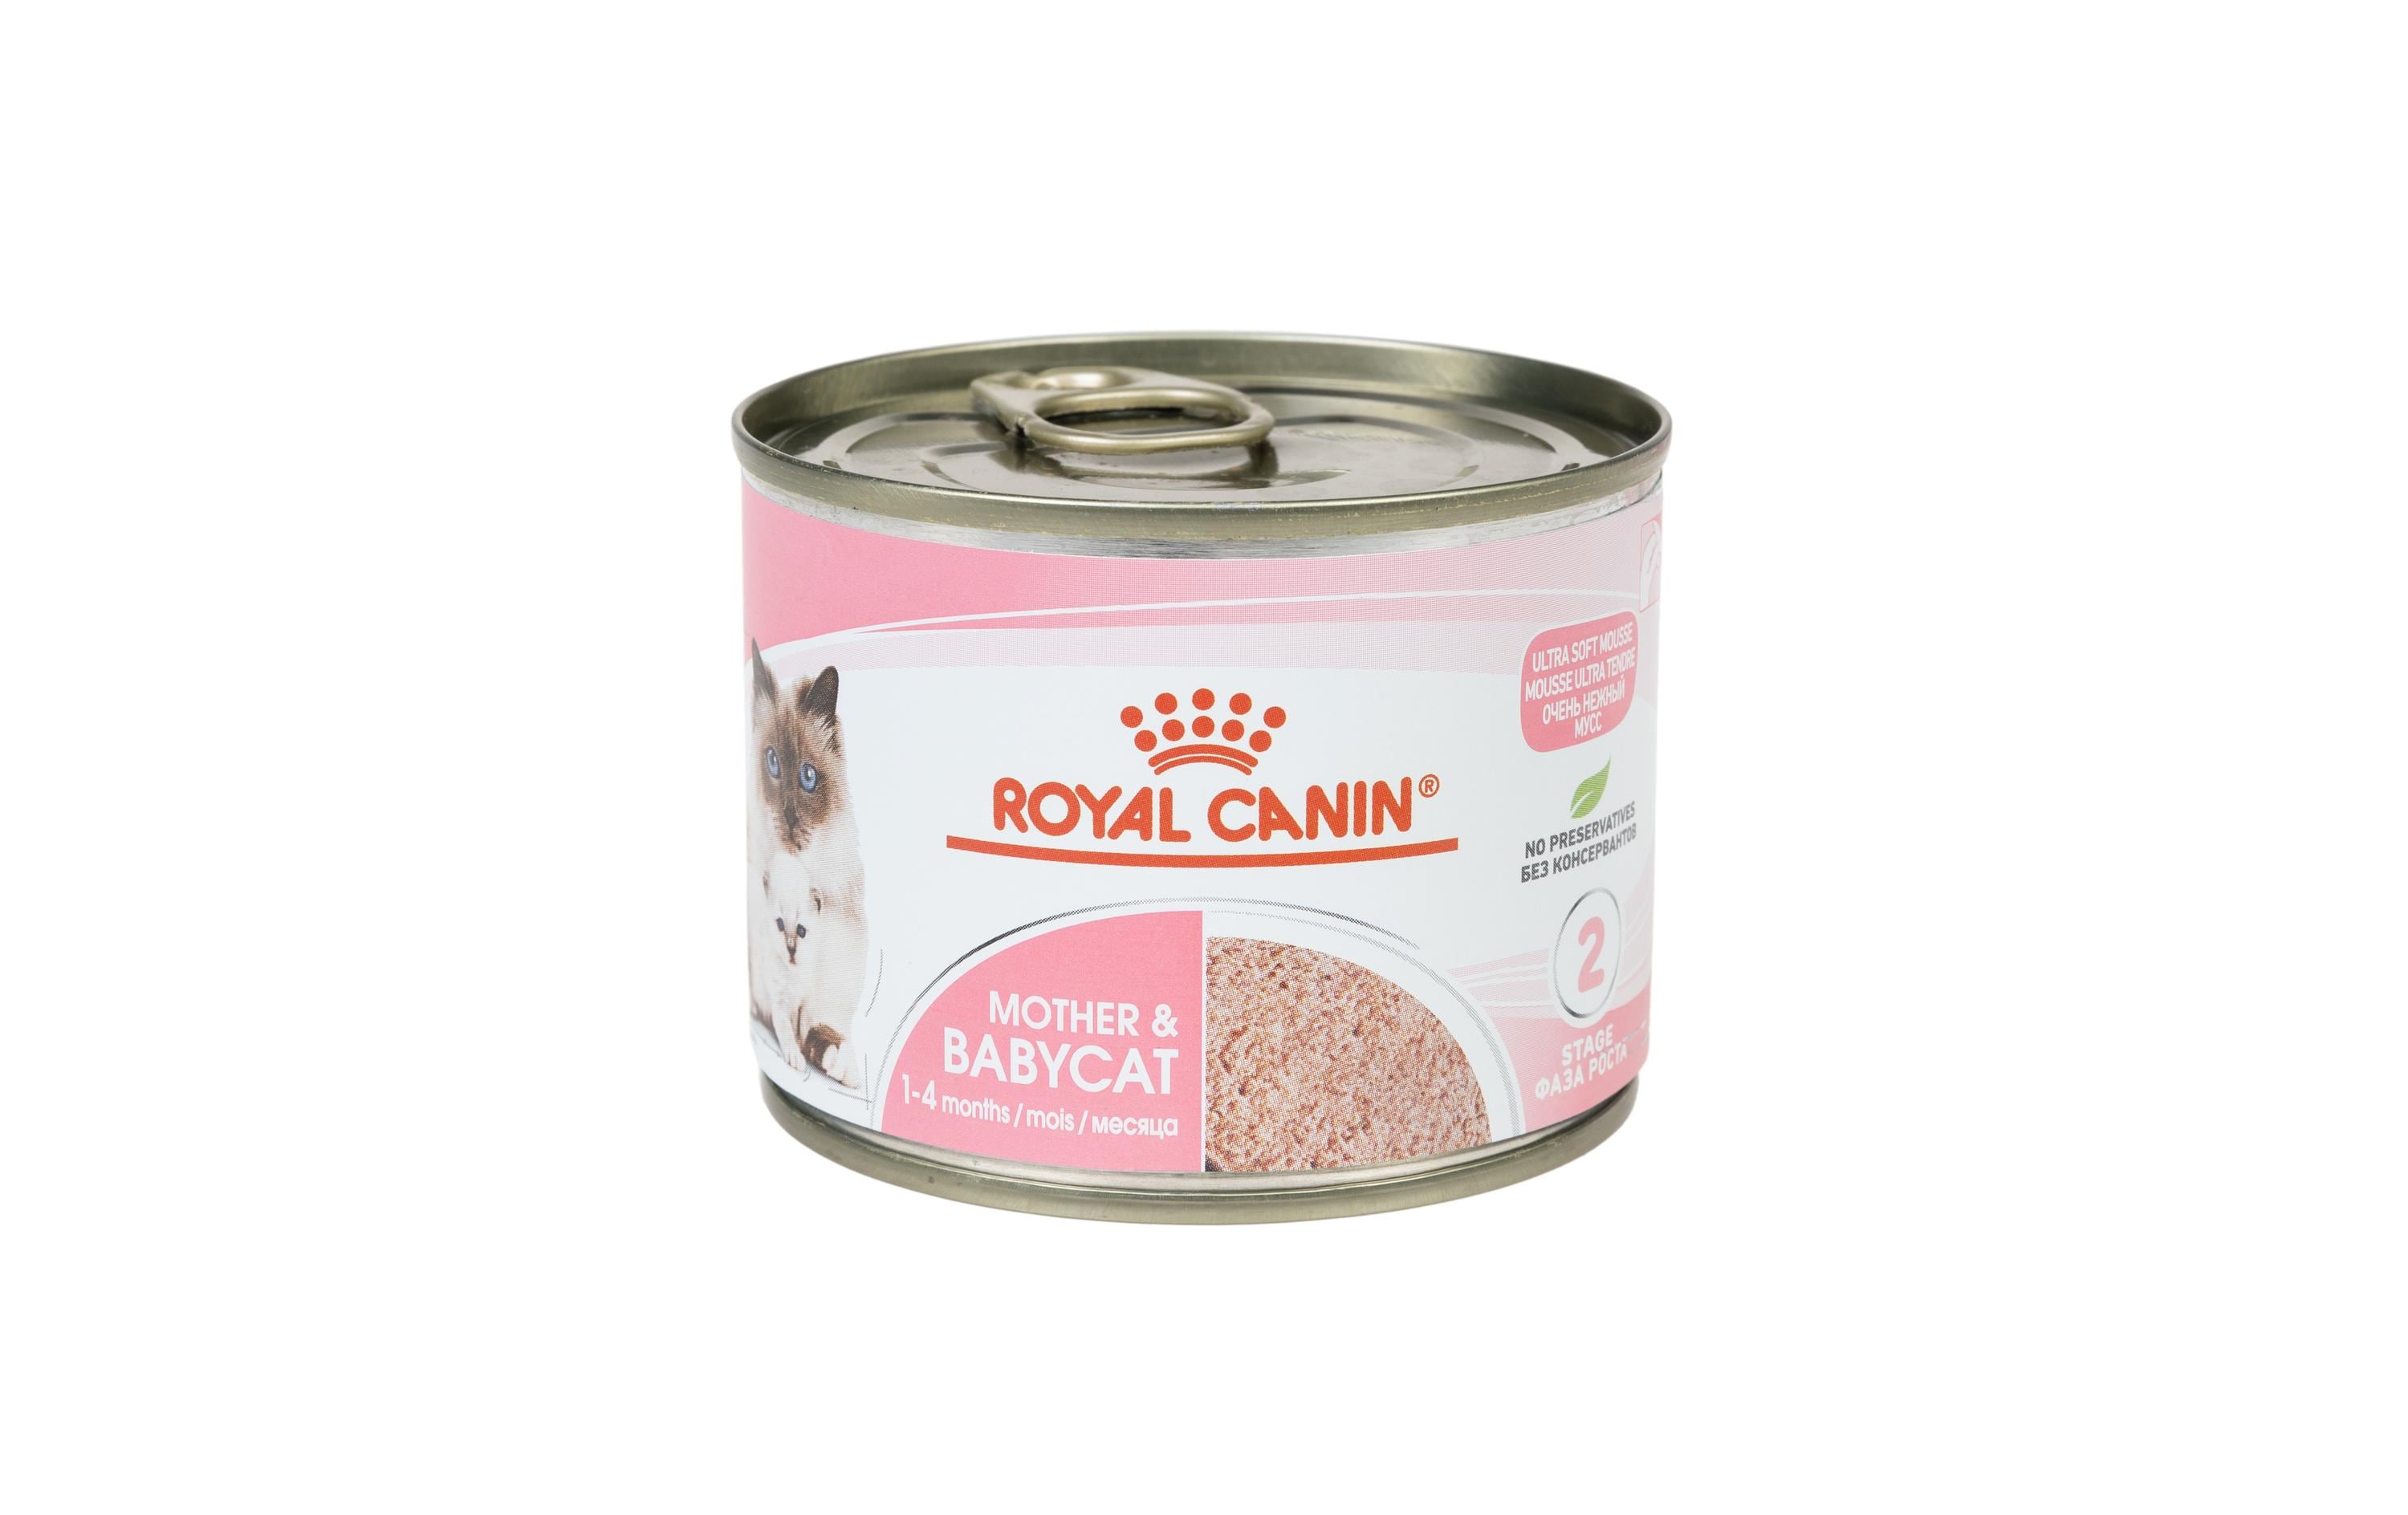 Royal Canin Nassfutter Mother & Babycat Mousse, 12 x 190 g